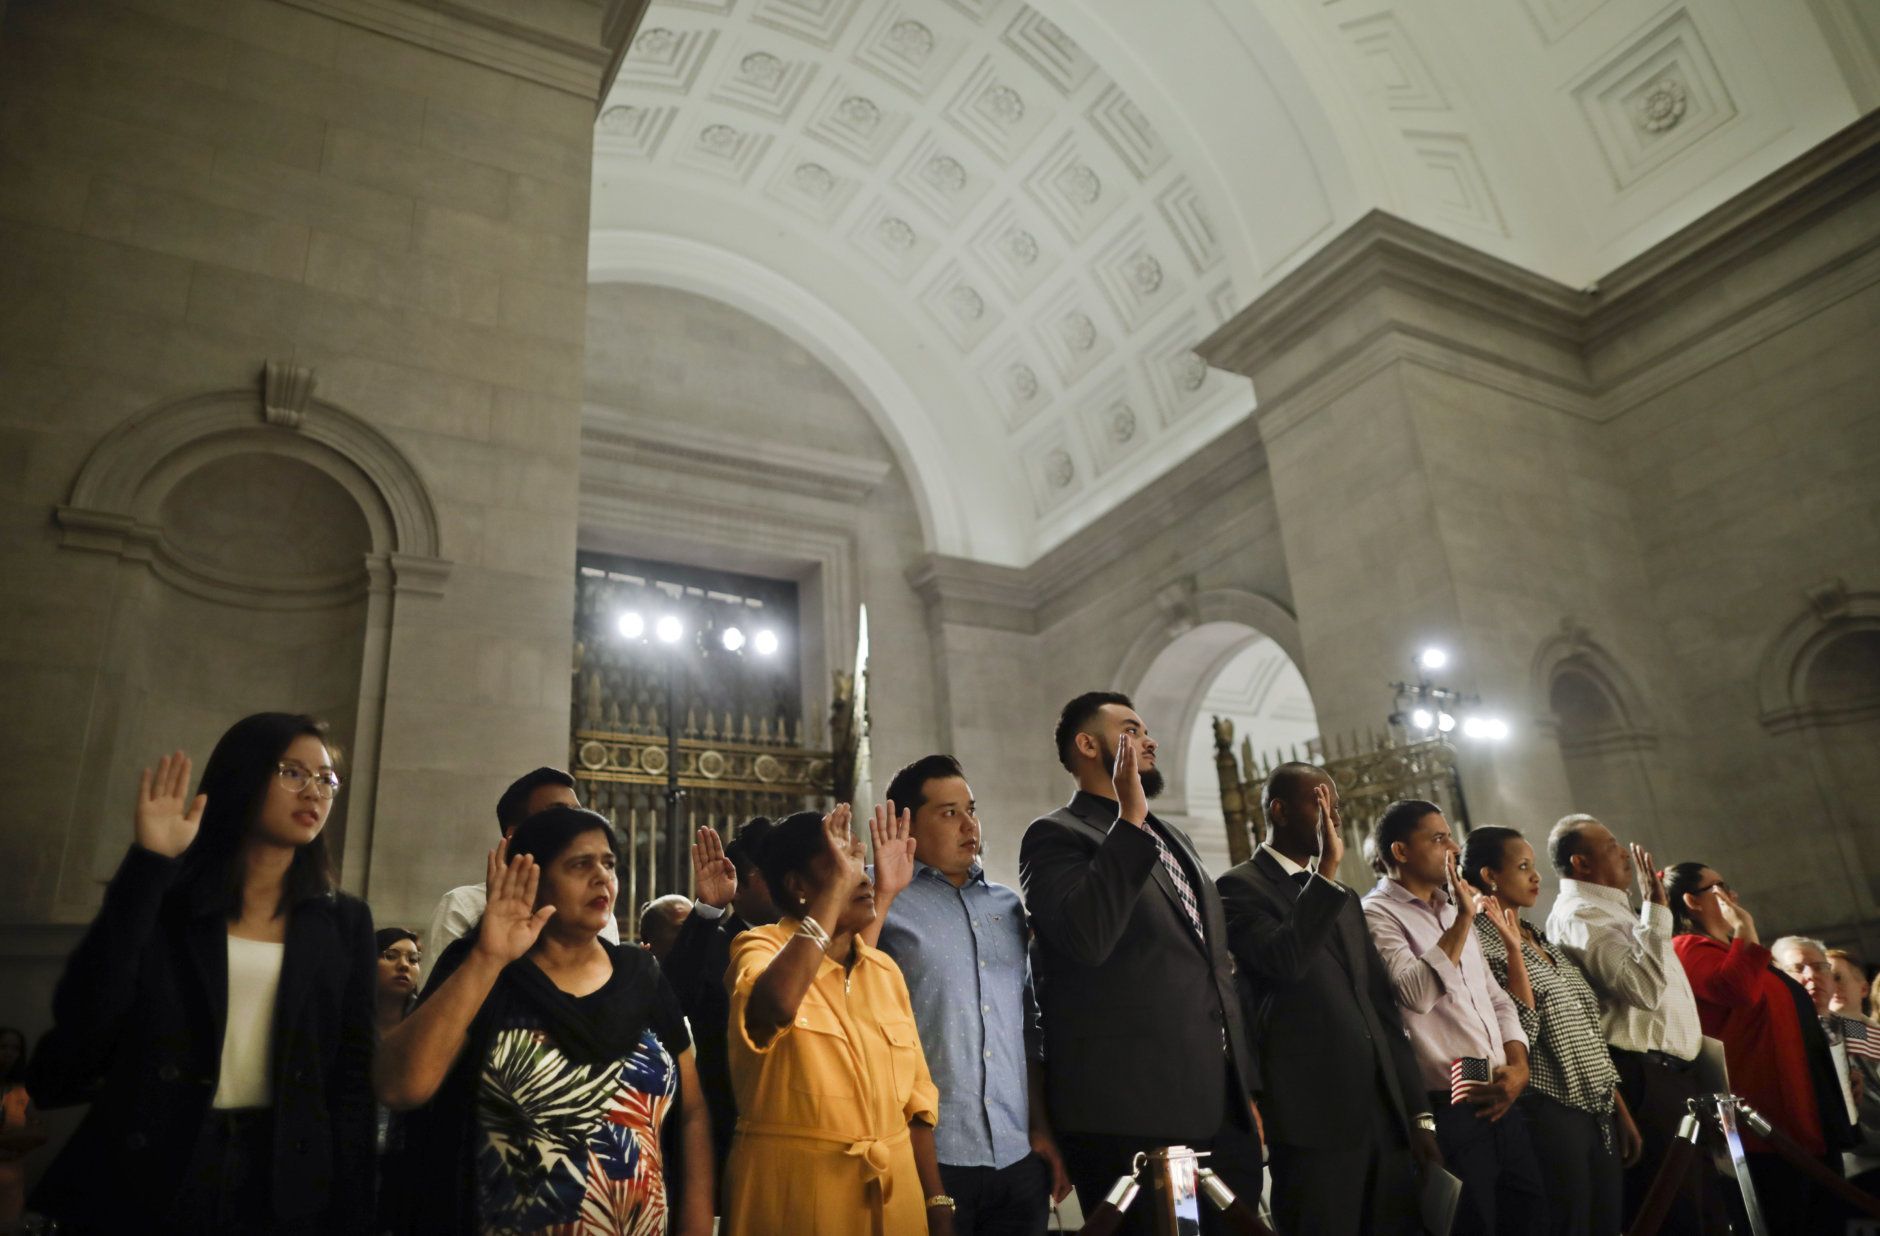 People raise their hands while taking the Oath of Allegiance during a naturalization ceremony in celebration of Independence Day at the National Archives in Washington, Thursday, July 4, 2019. (AP Photo/Pablo Martinez Monsivais)